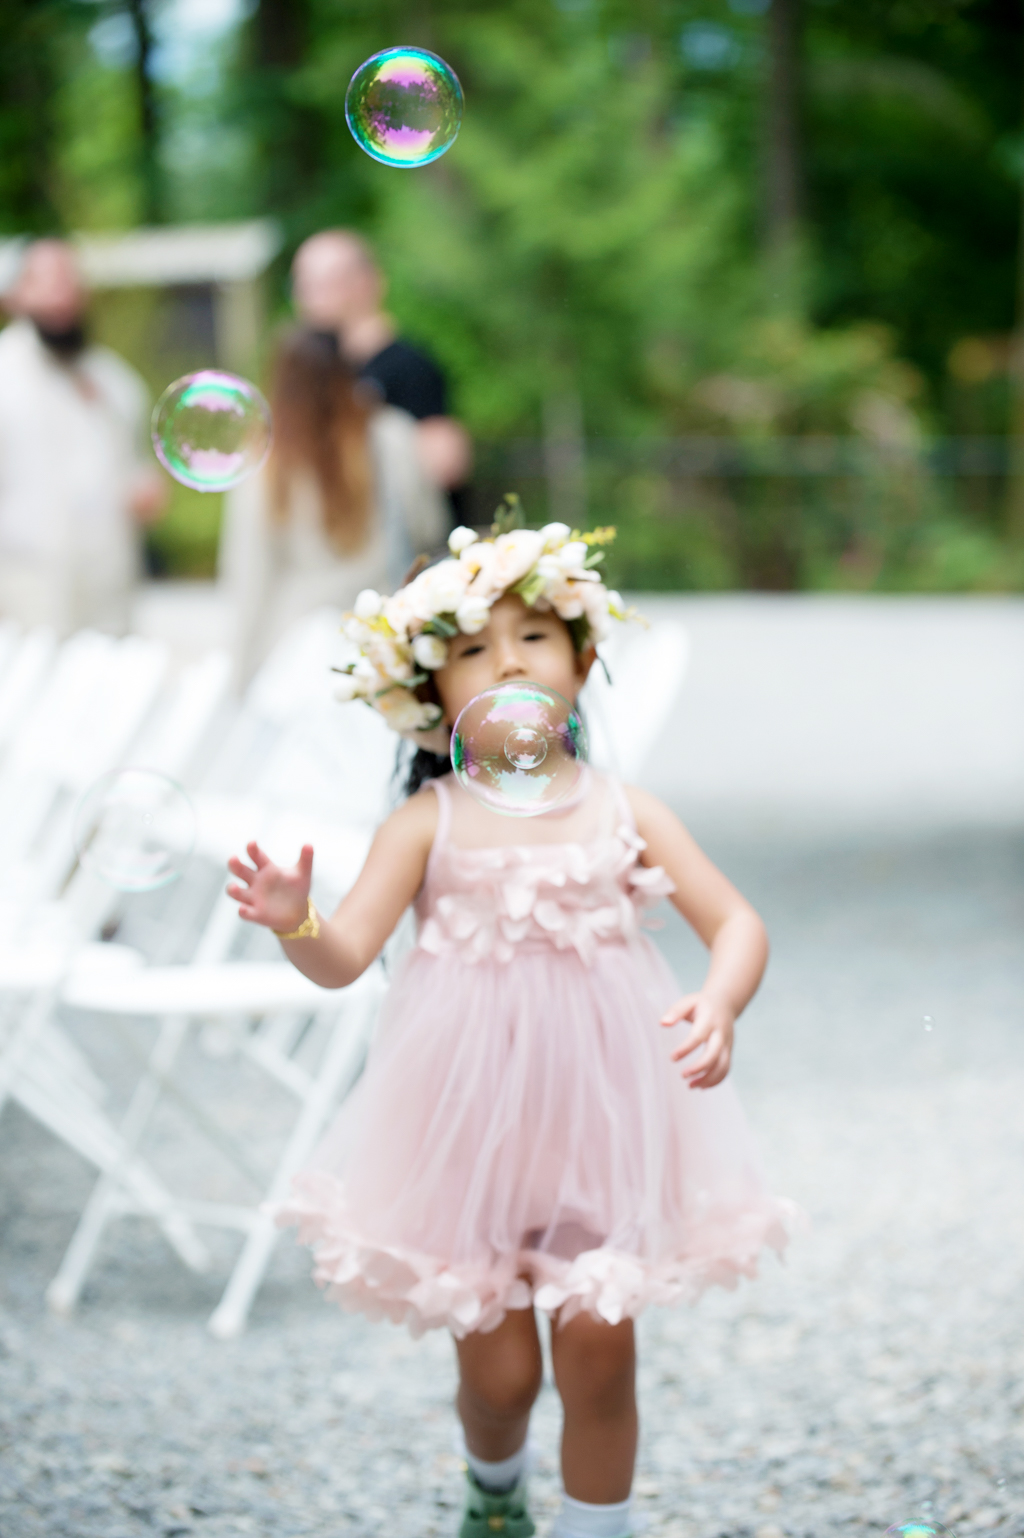 a flower girl in a pink dress and a flower crown chases a bubble